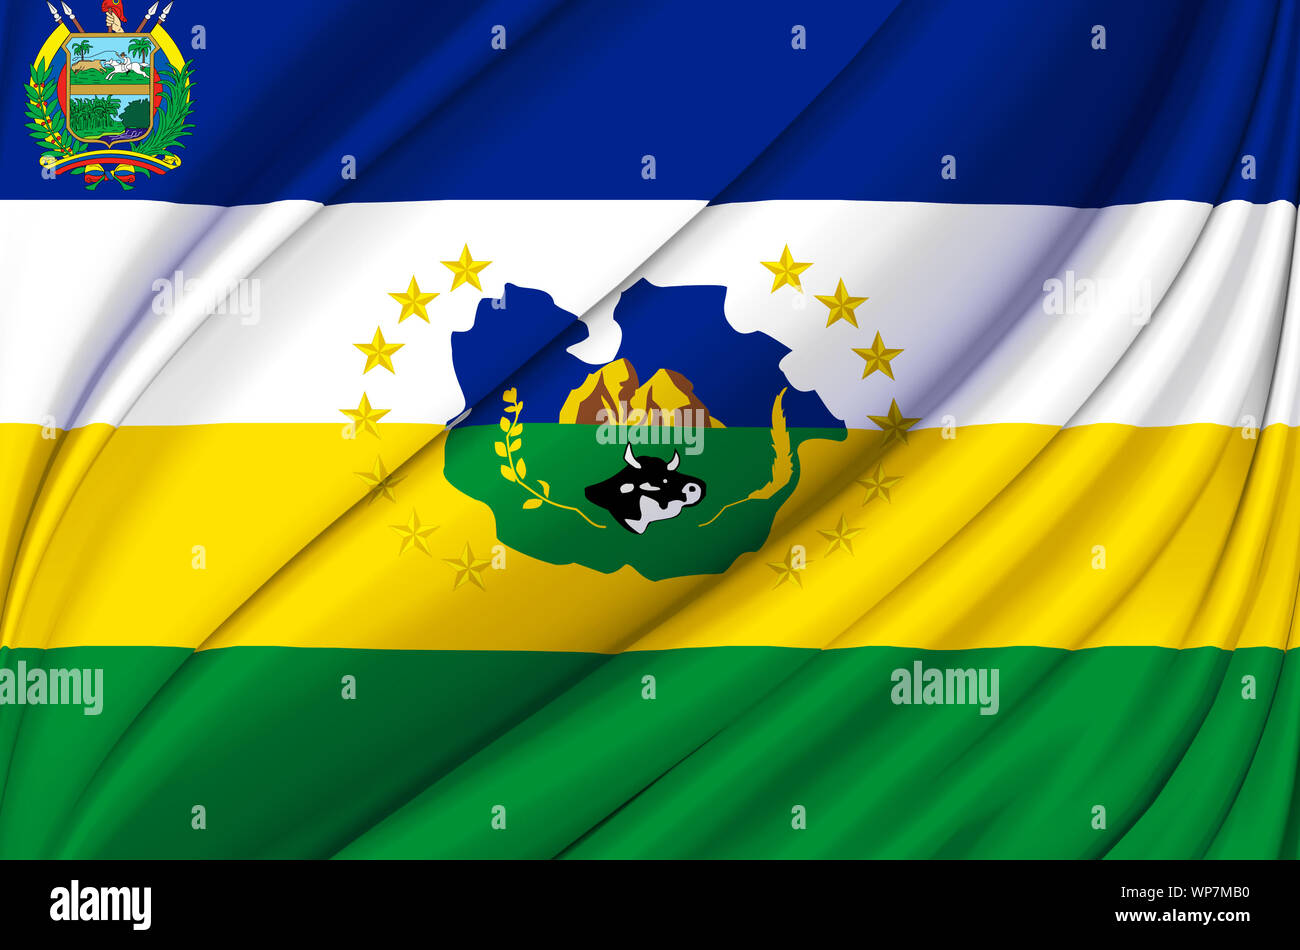 Guarico waving flag illustration. Regions of Venezuela. Perfect for background and texture usage. Stock Photo